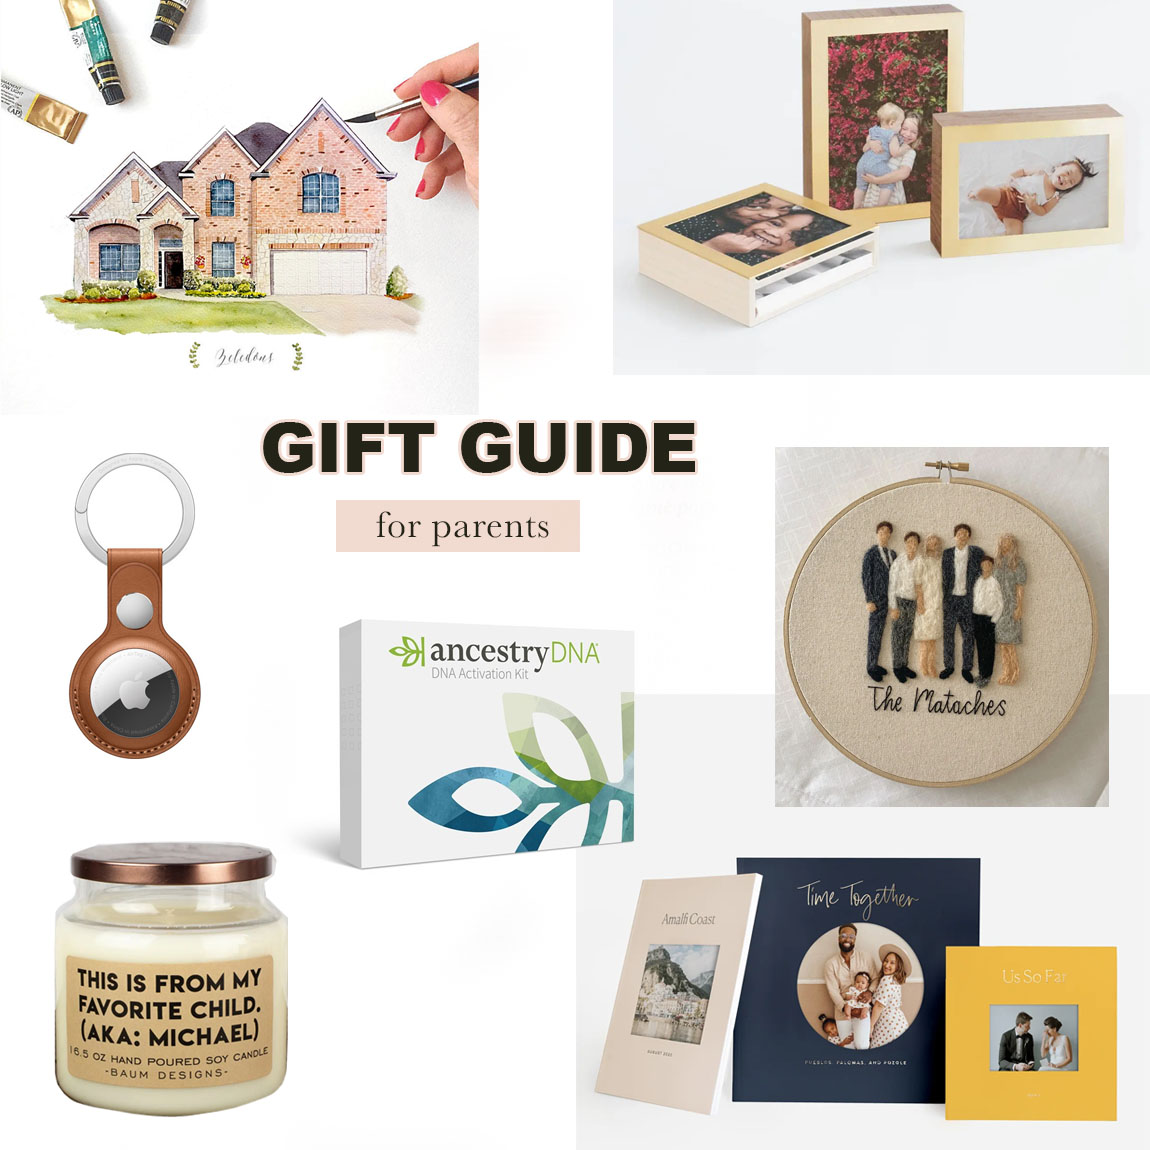 24 Anniversary Gifts for Parents to Celebrate Their Marriage